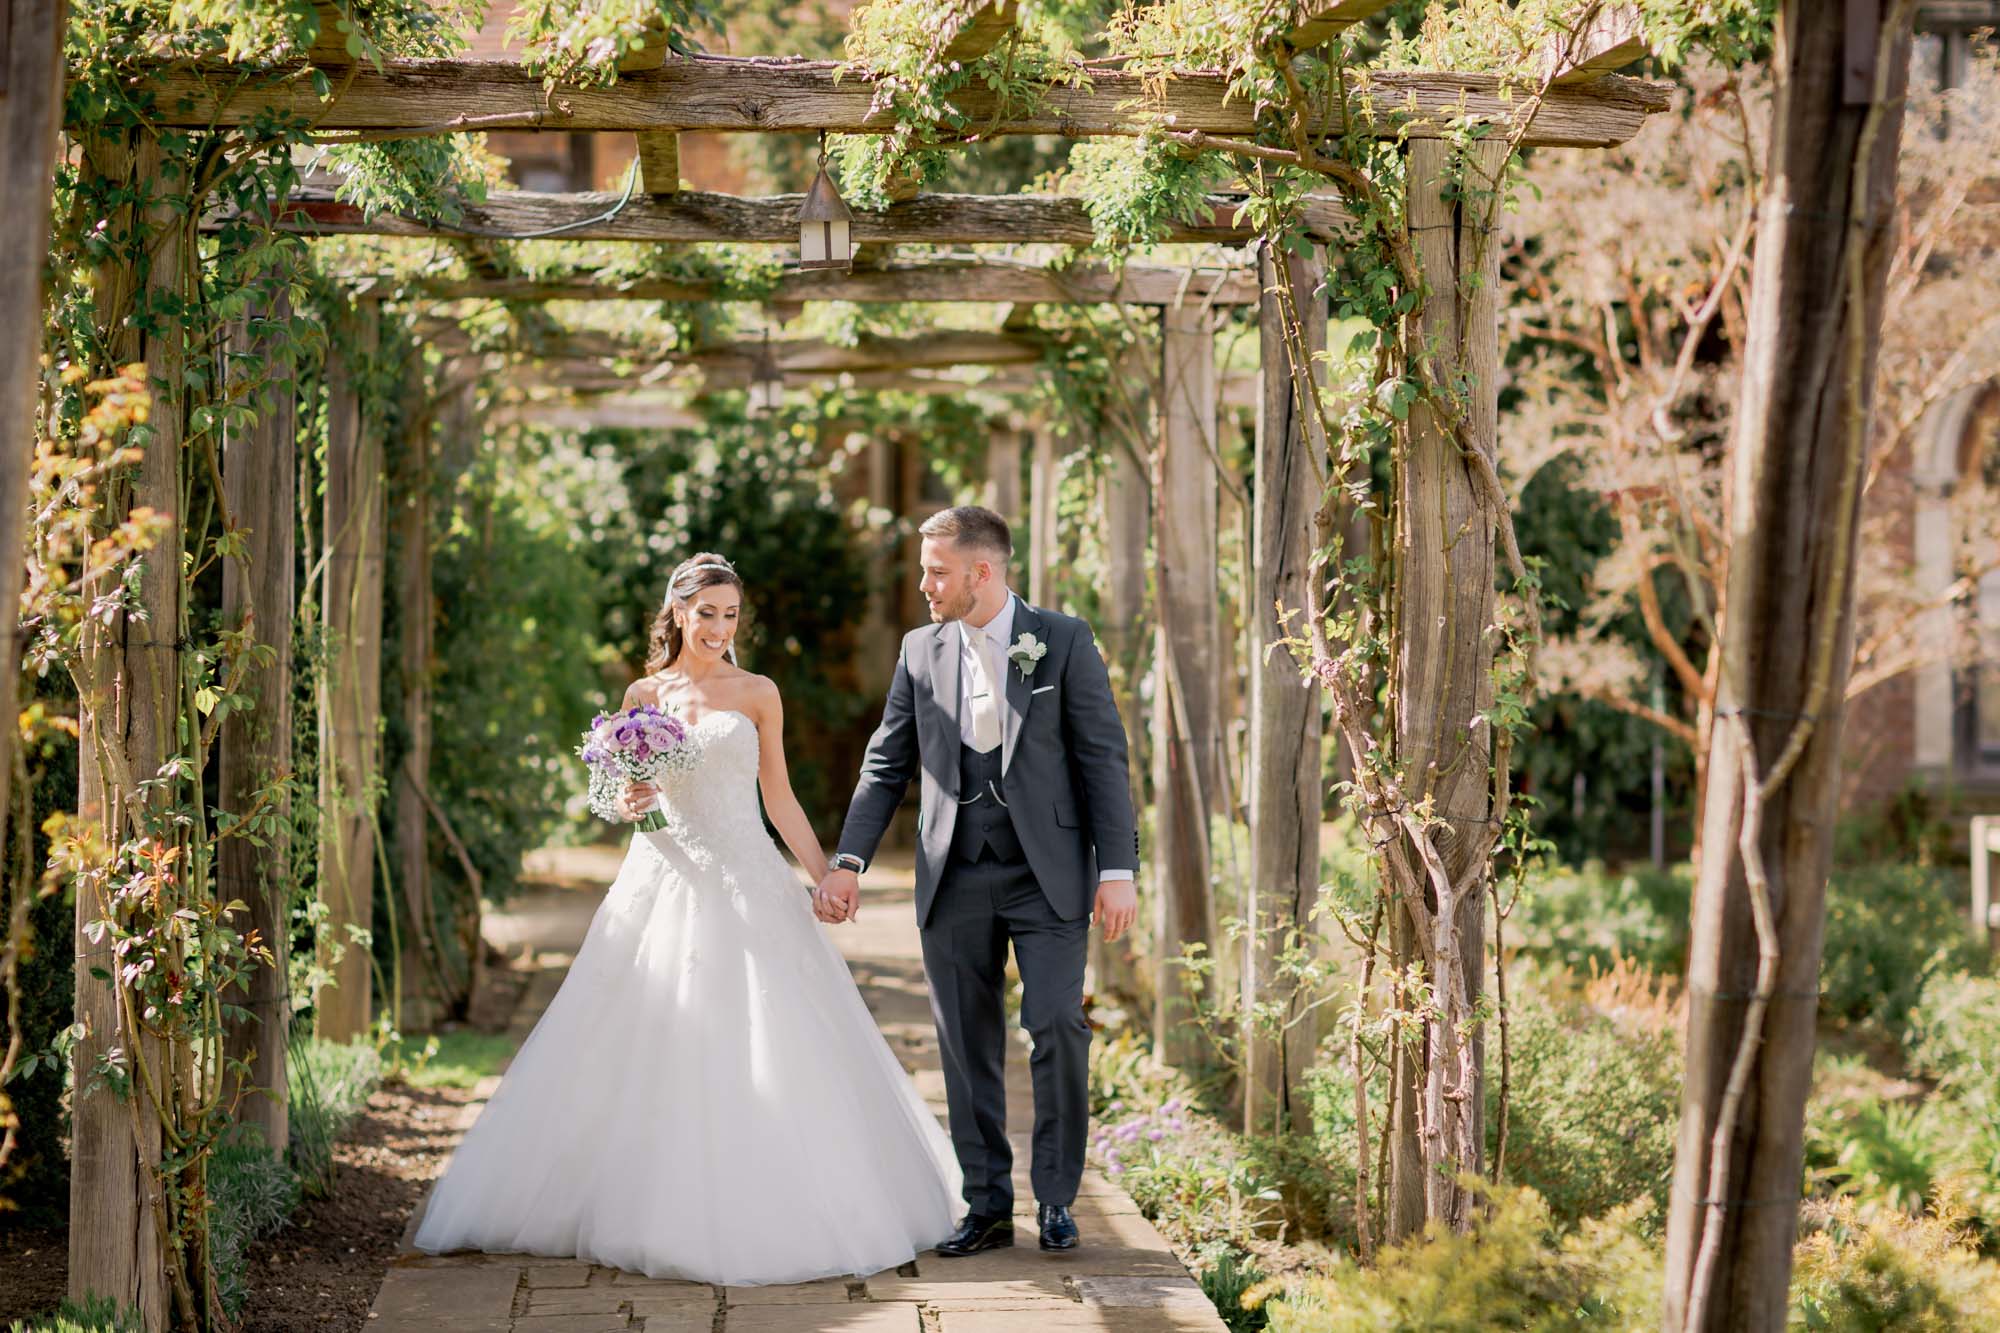 Bride and groom smiling whilst they take a stroll on their wedding day at Great Fosters wedding venue in Egham, Surrey.